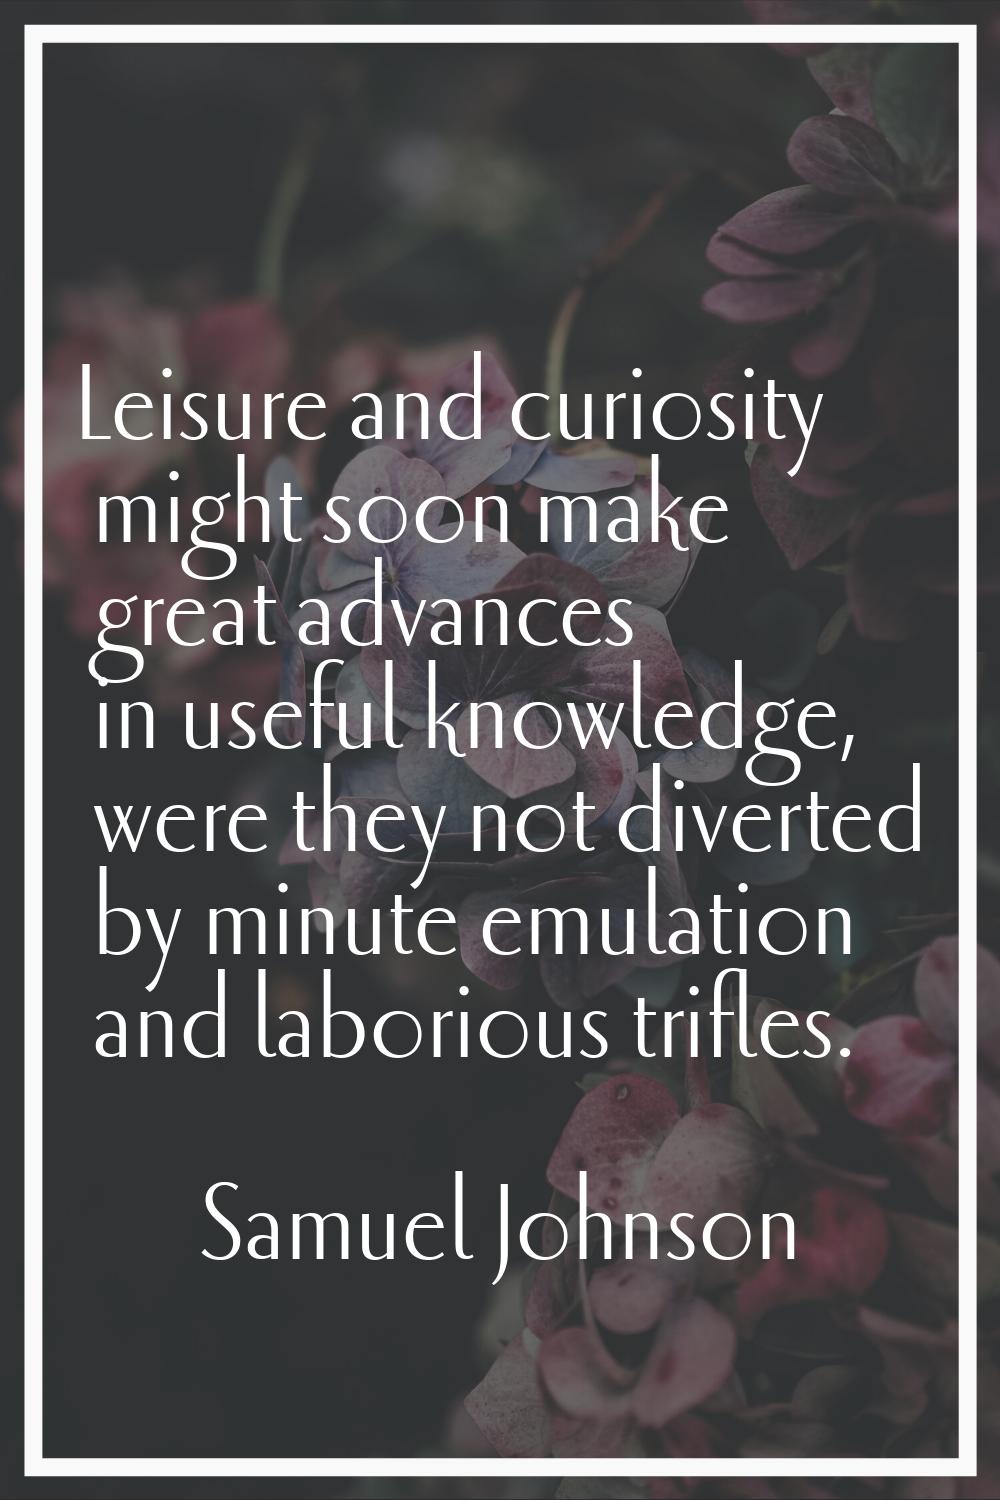 Leisure and curiosity might soon make great advances in useful knowledge, were they not diverted by